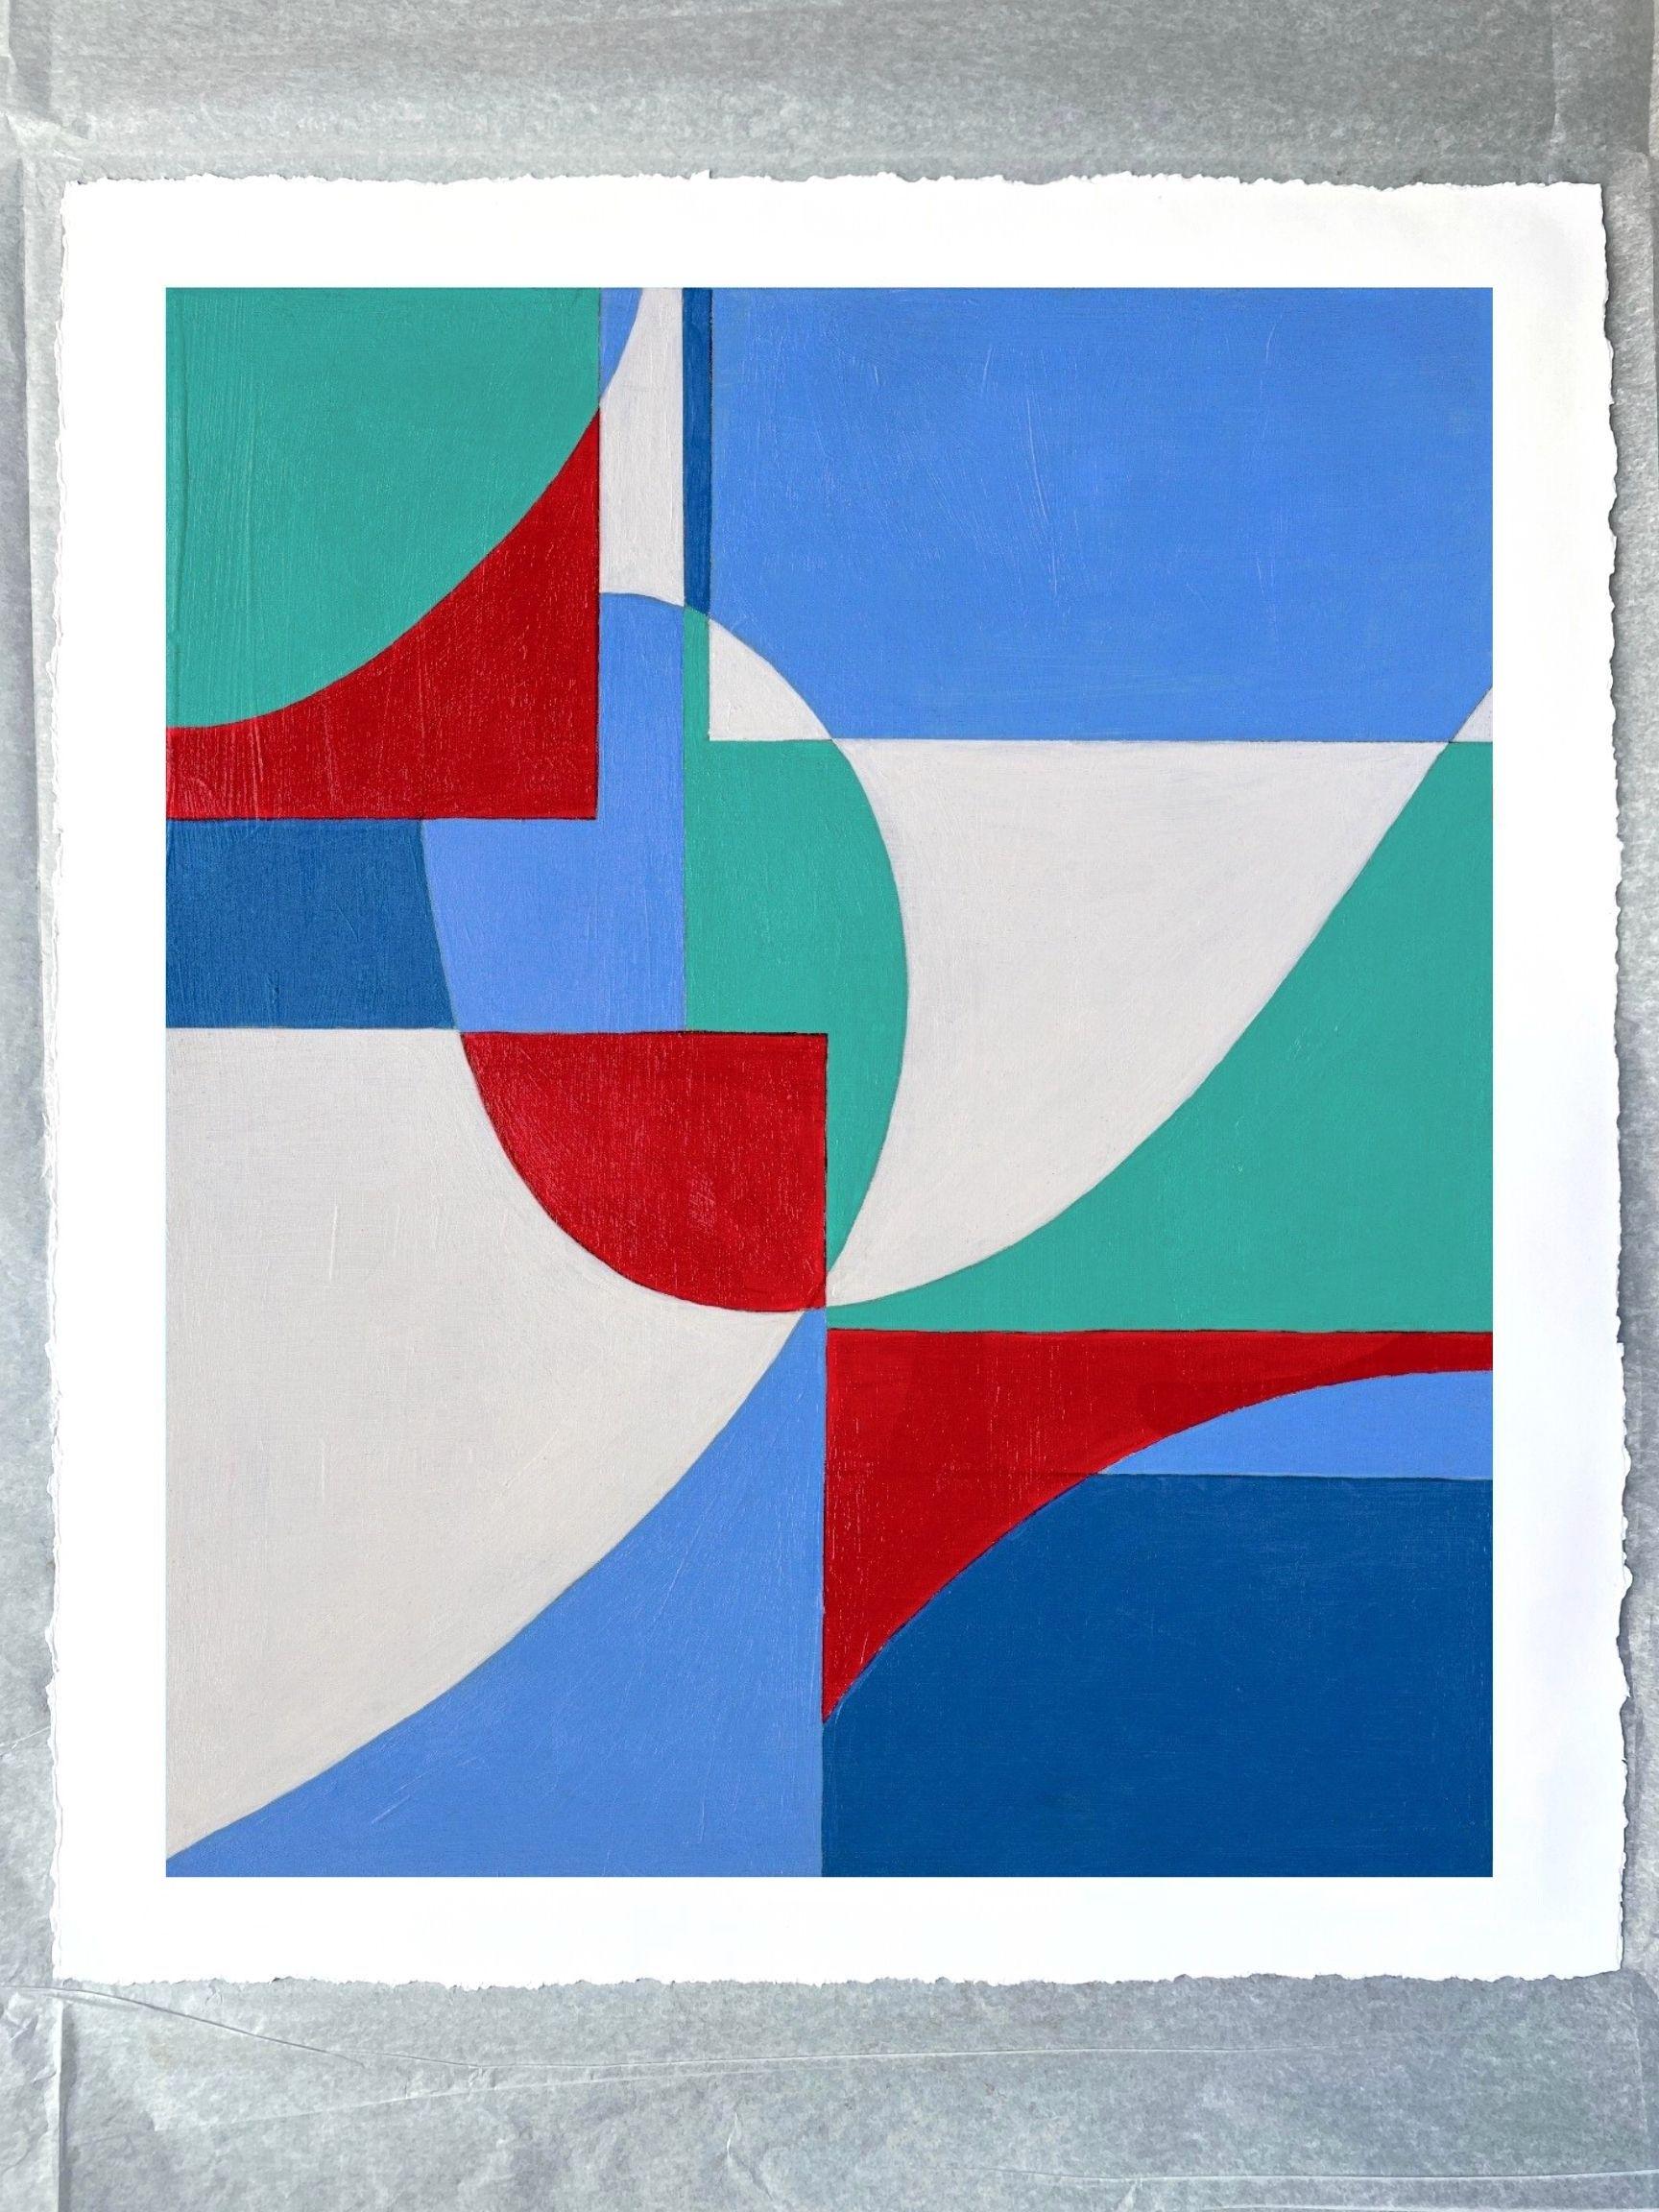 GA1221 Limited edition 2/10 giclee geometric abstraction signed print - Abstract Geometric Mixed Media Art by Zach Touchon